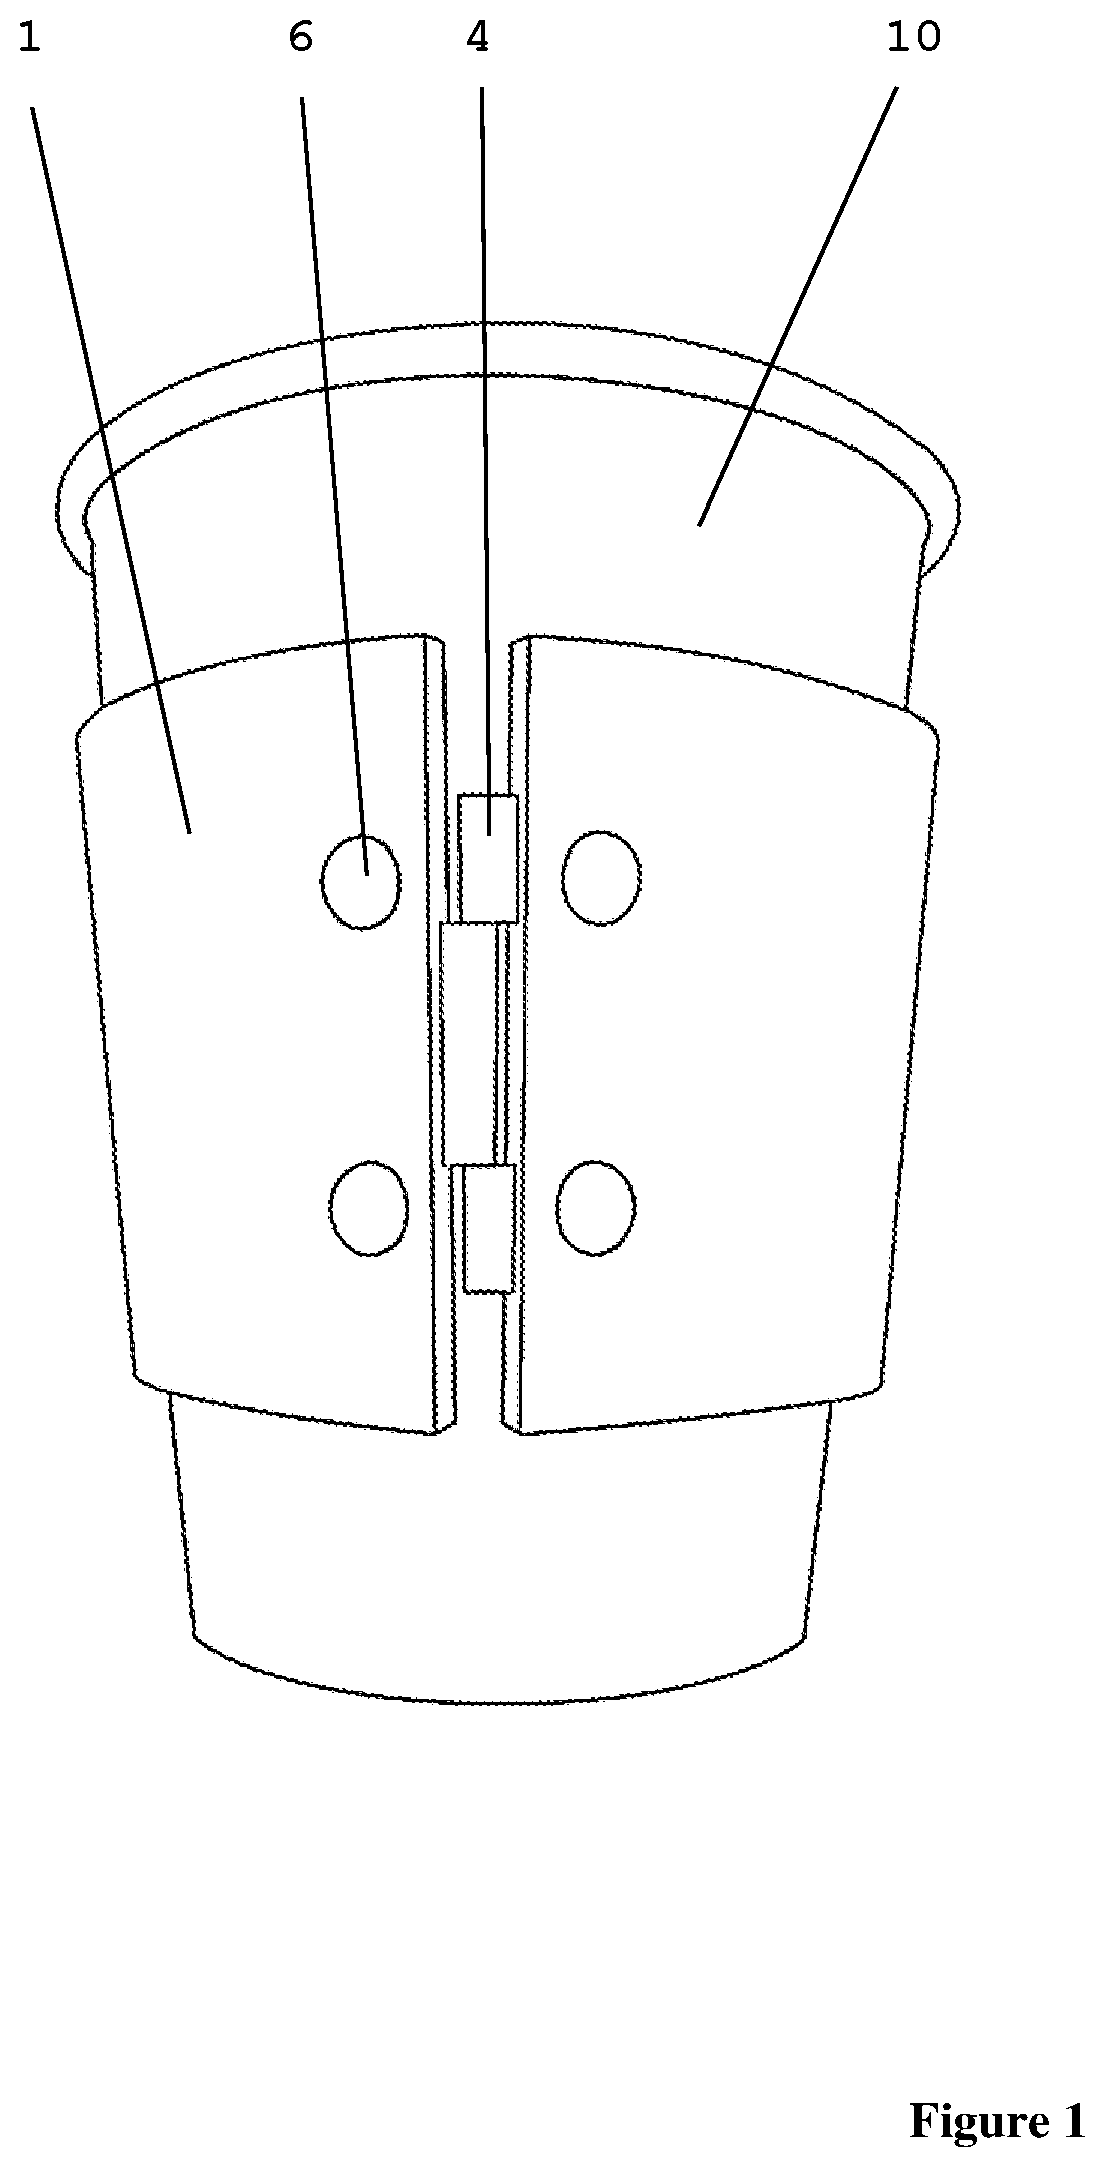 Sleeve for holding and carrying cups and containers having hot or cold contents